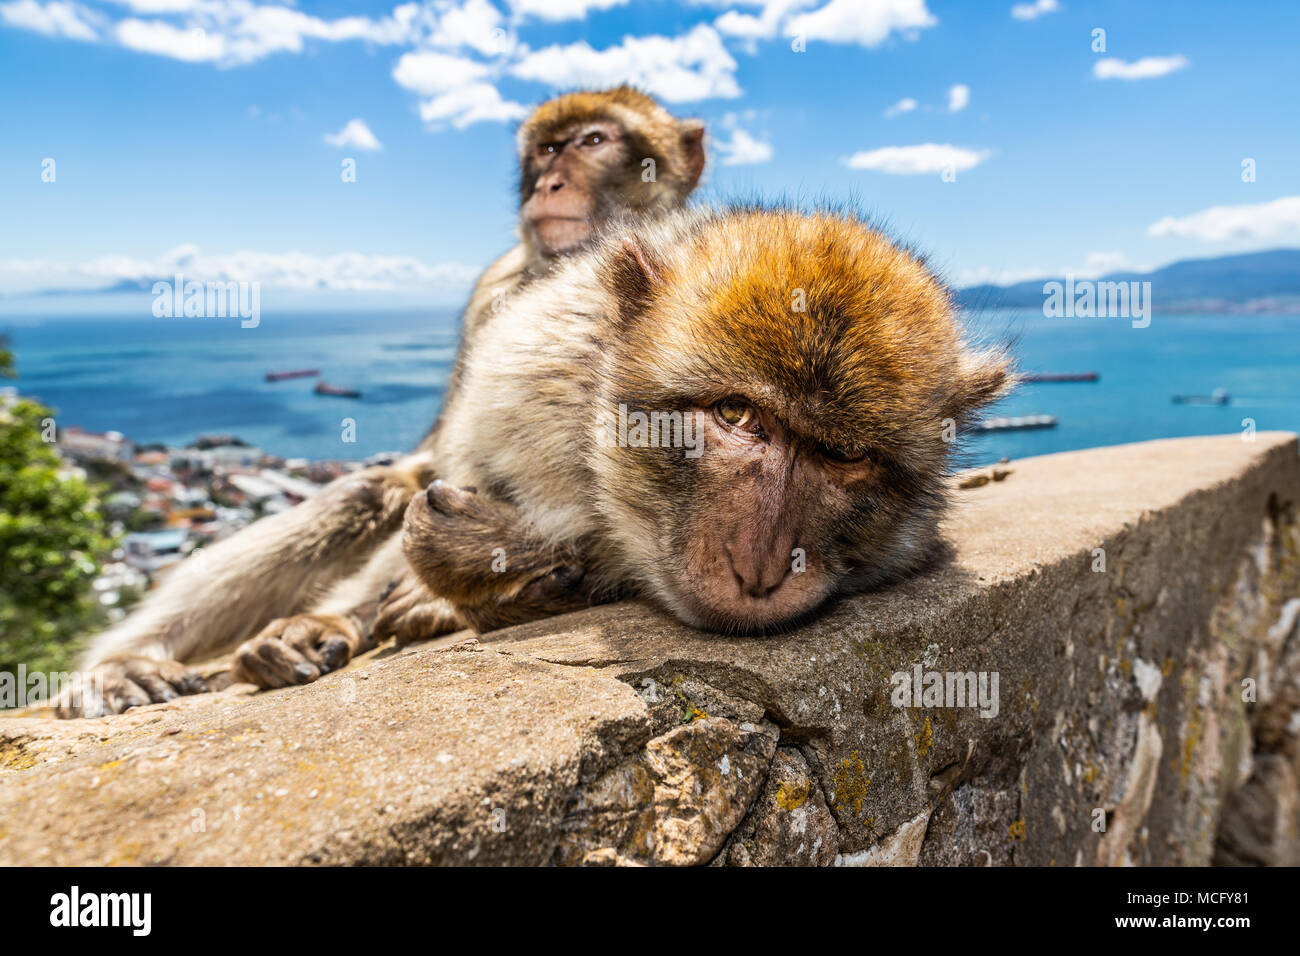 Barbary macaques in Gibraltar, the only wild monkeys in Europe, they number about 300 animals in 5 troops. Stock Photo